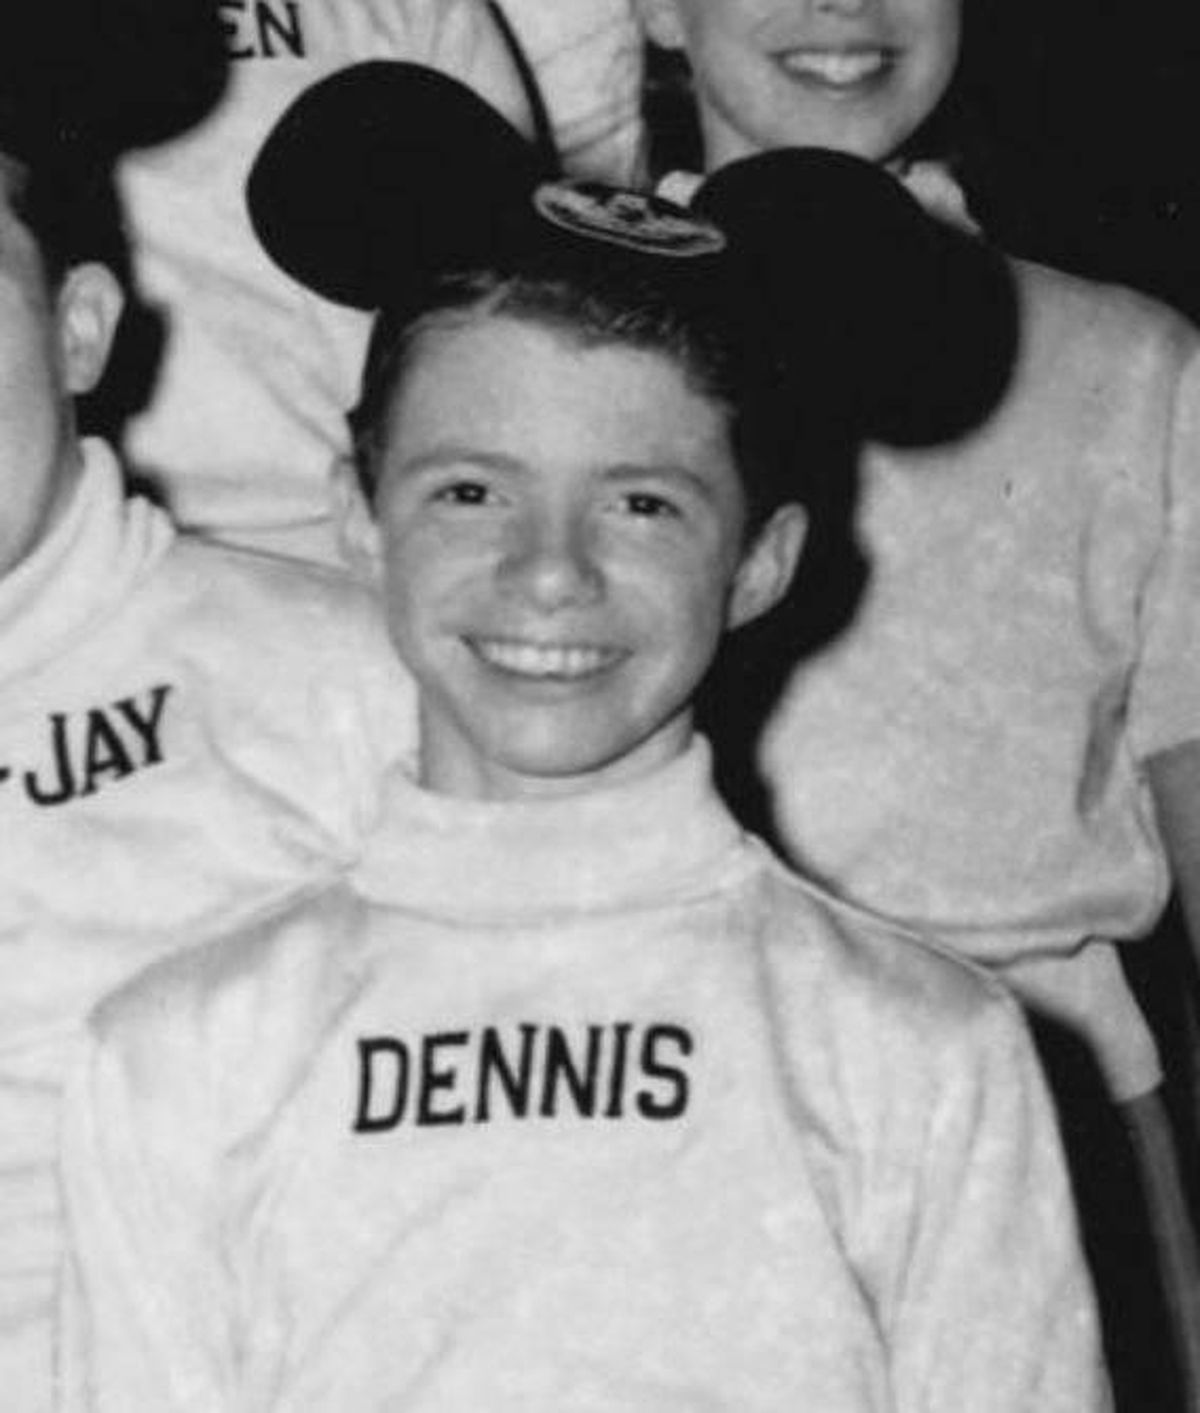 Police have found a body at the home of Dennis Day, seen here, who was an original member of Disney’s “The Mickey Mouse Club.” Police have not identified the body. Day was reported missing July 15 by his husband, who suffers from memory loss and was hospitalized at the time of reporting. (Courtesy / Alamy Stock/NBC News)